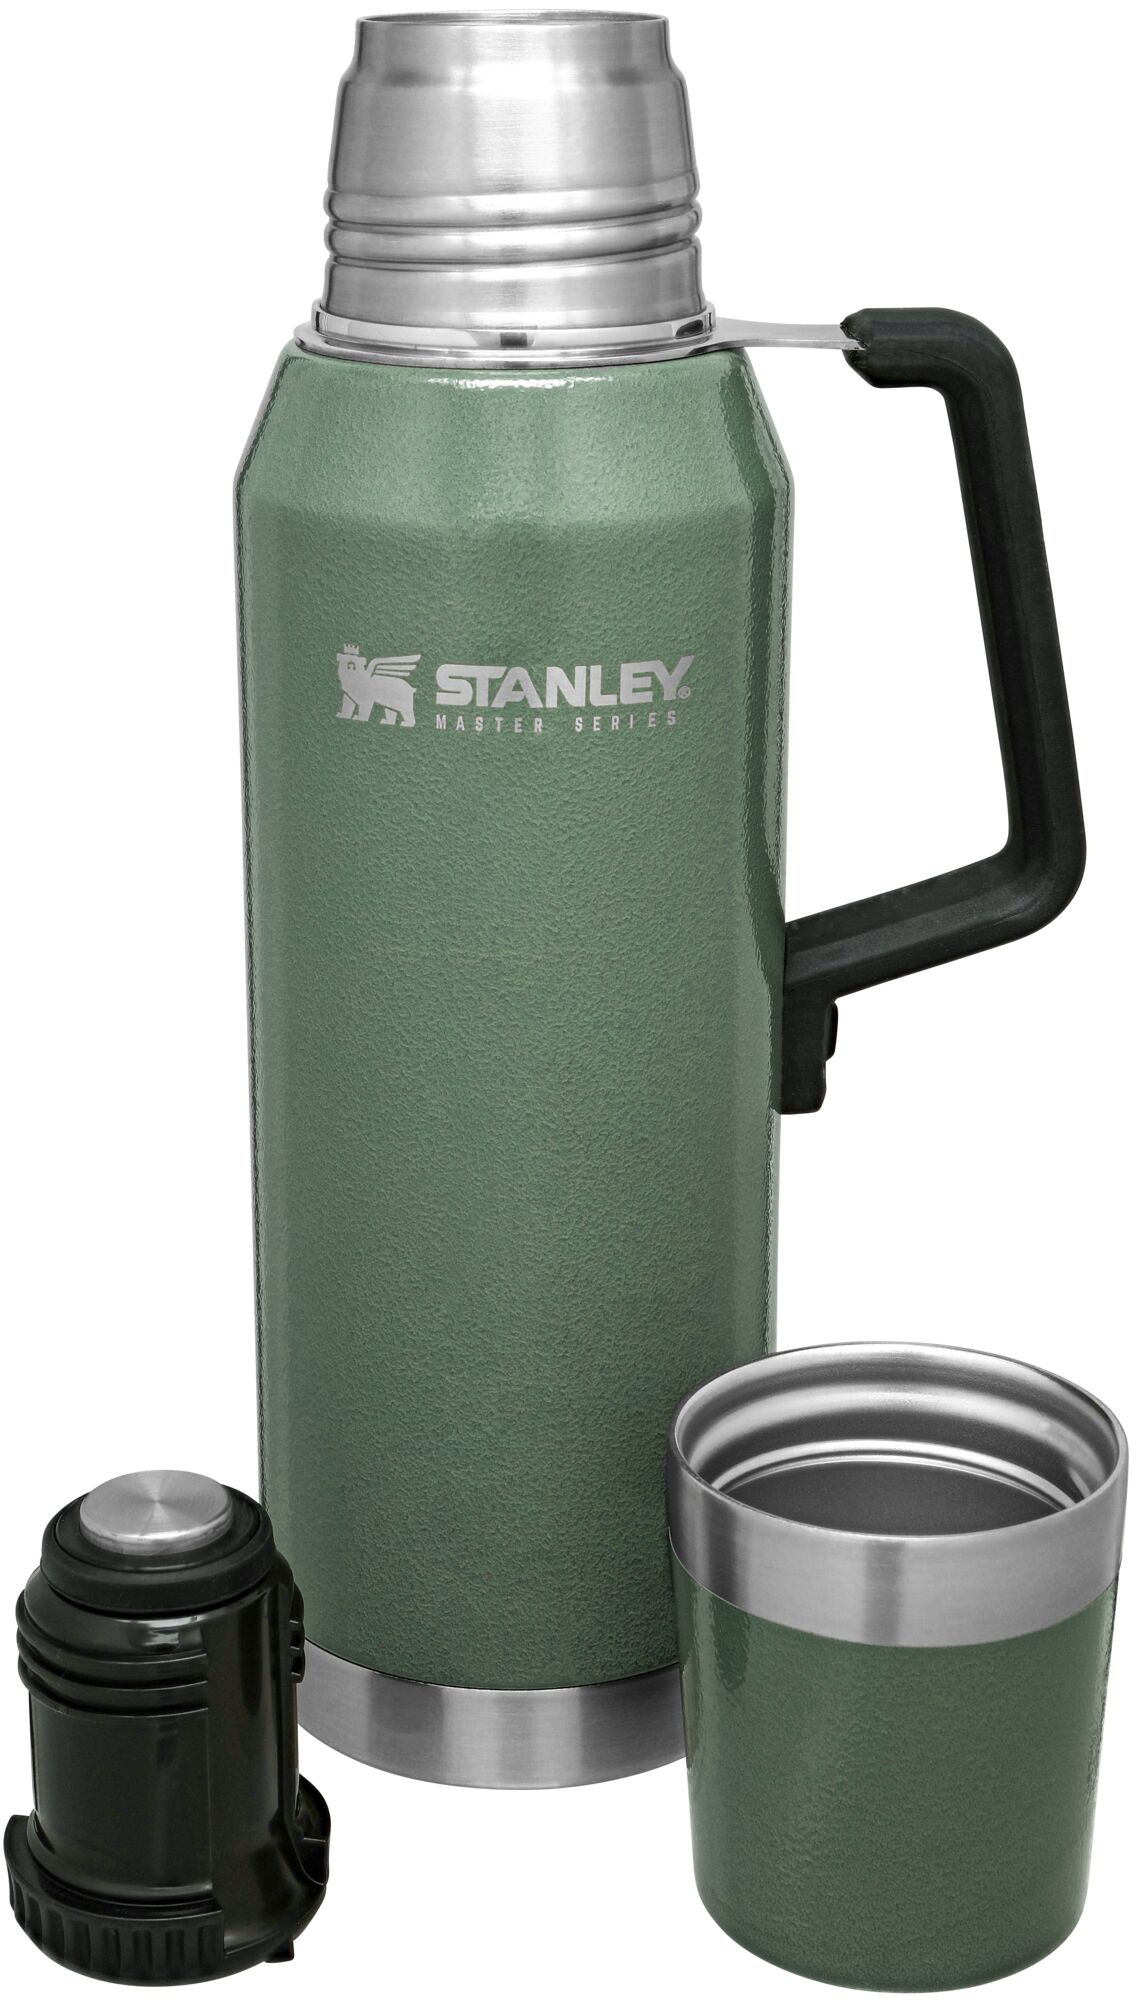 Stanley Thermos Stainless Steel Green 1.1 Quart EN12546-1 Handle Hammered  New